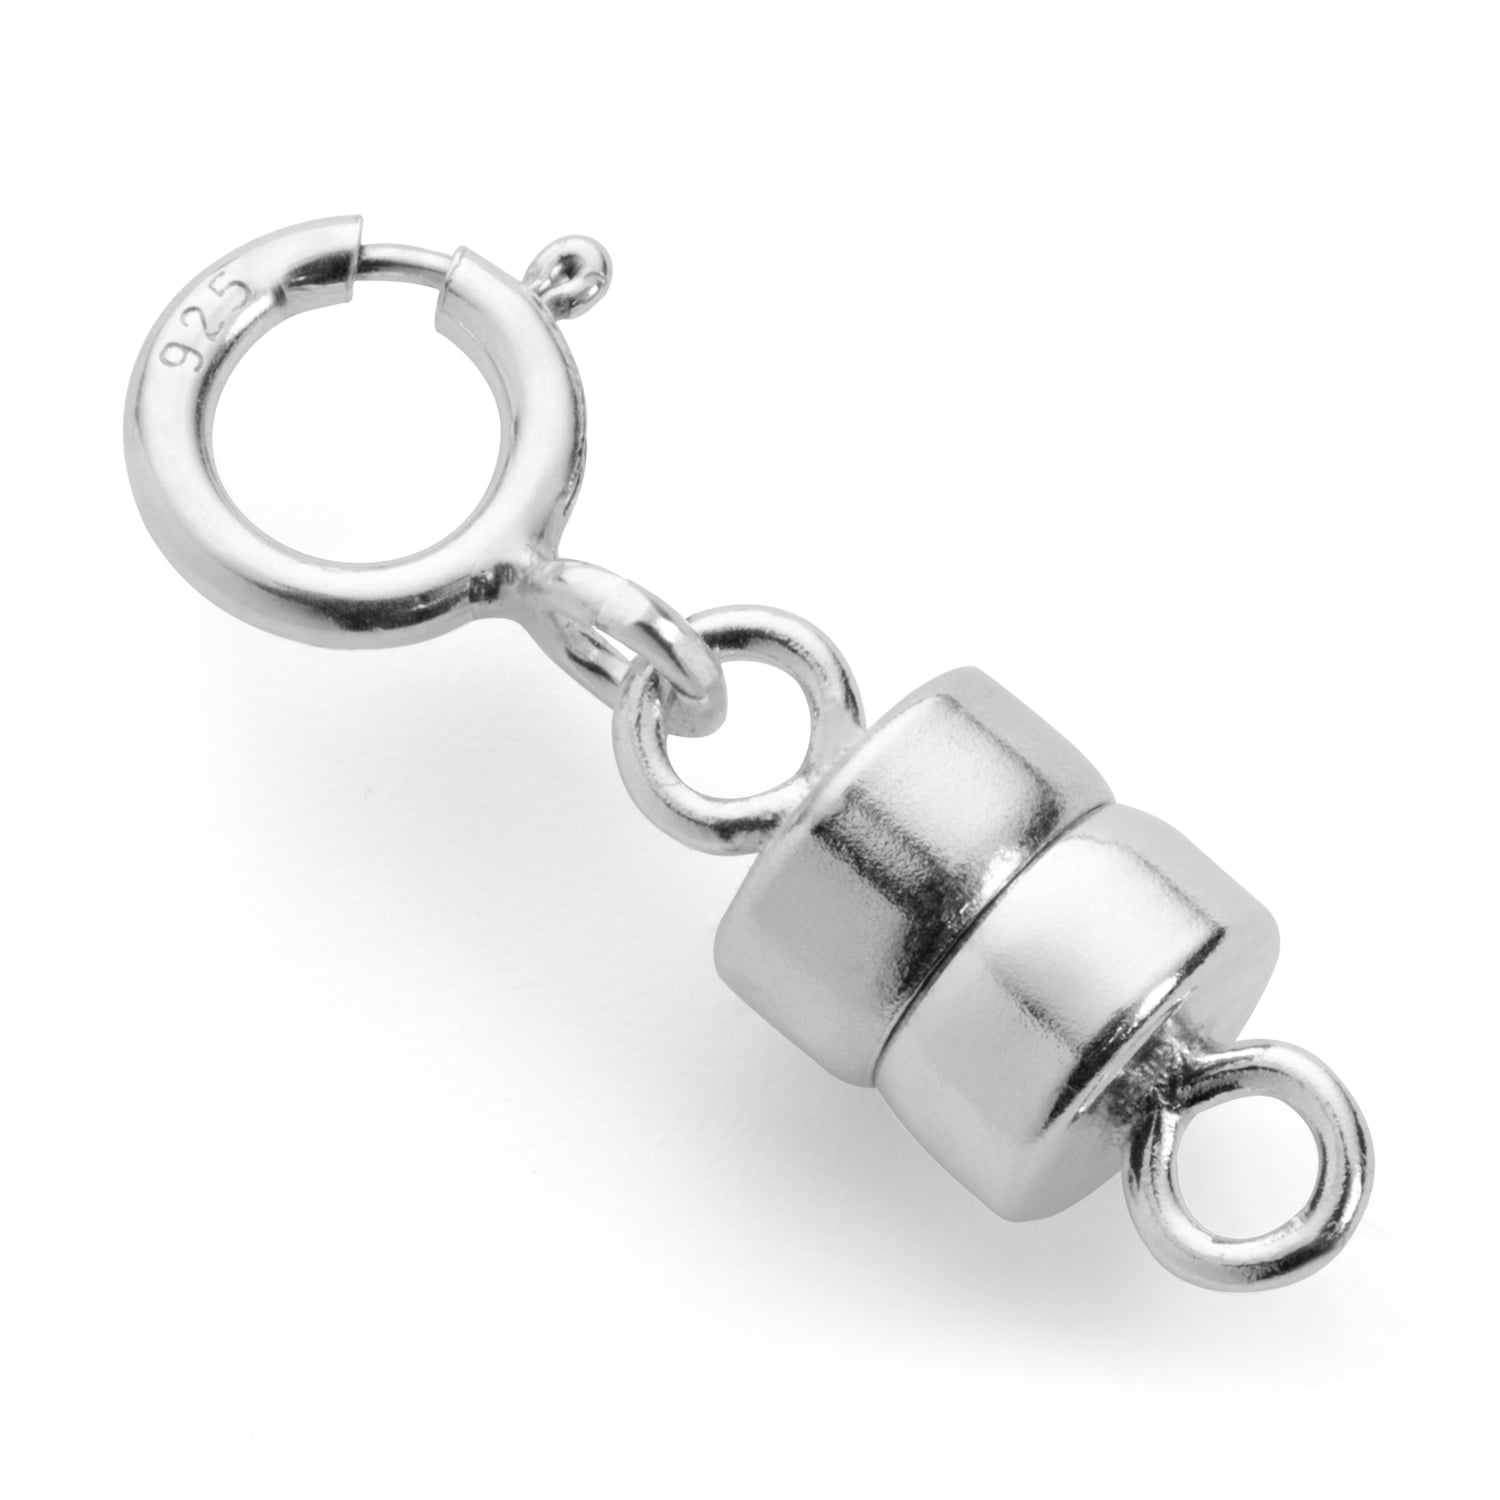 Set of 4 Beadaholique Silver Plated Magnetic Clasps 6 x 4.5mm